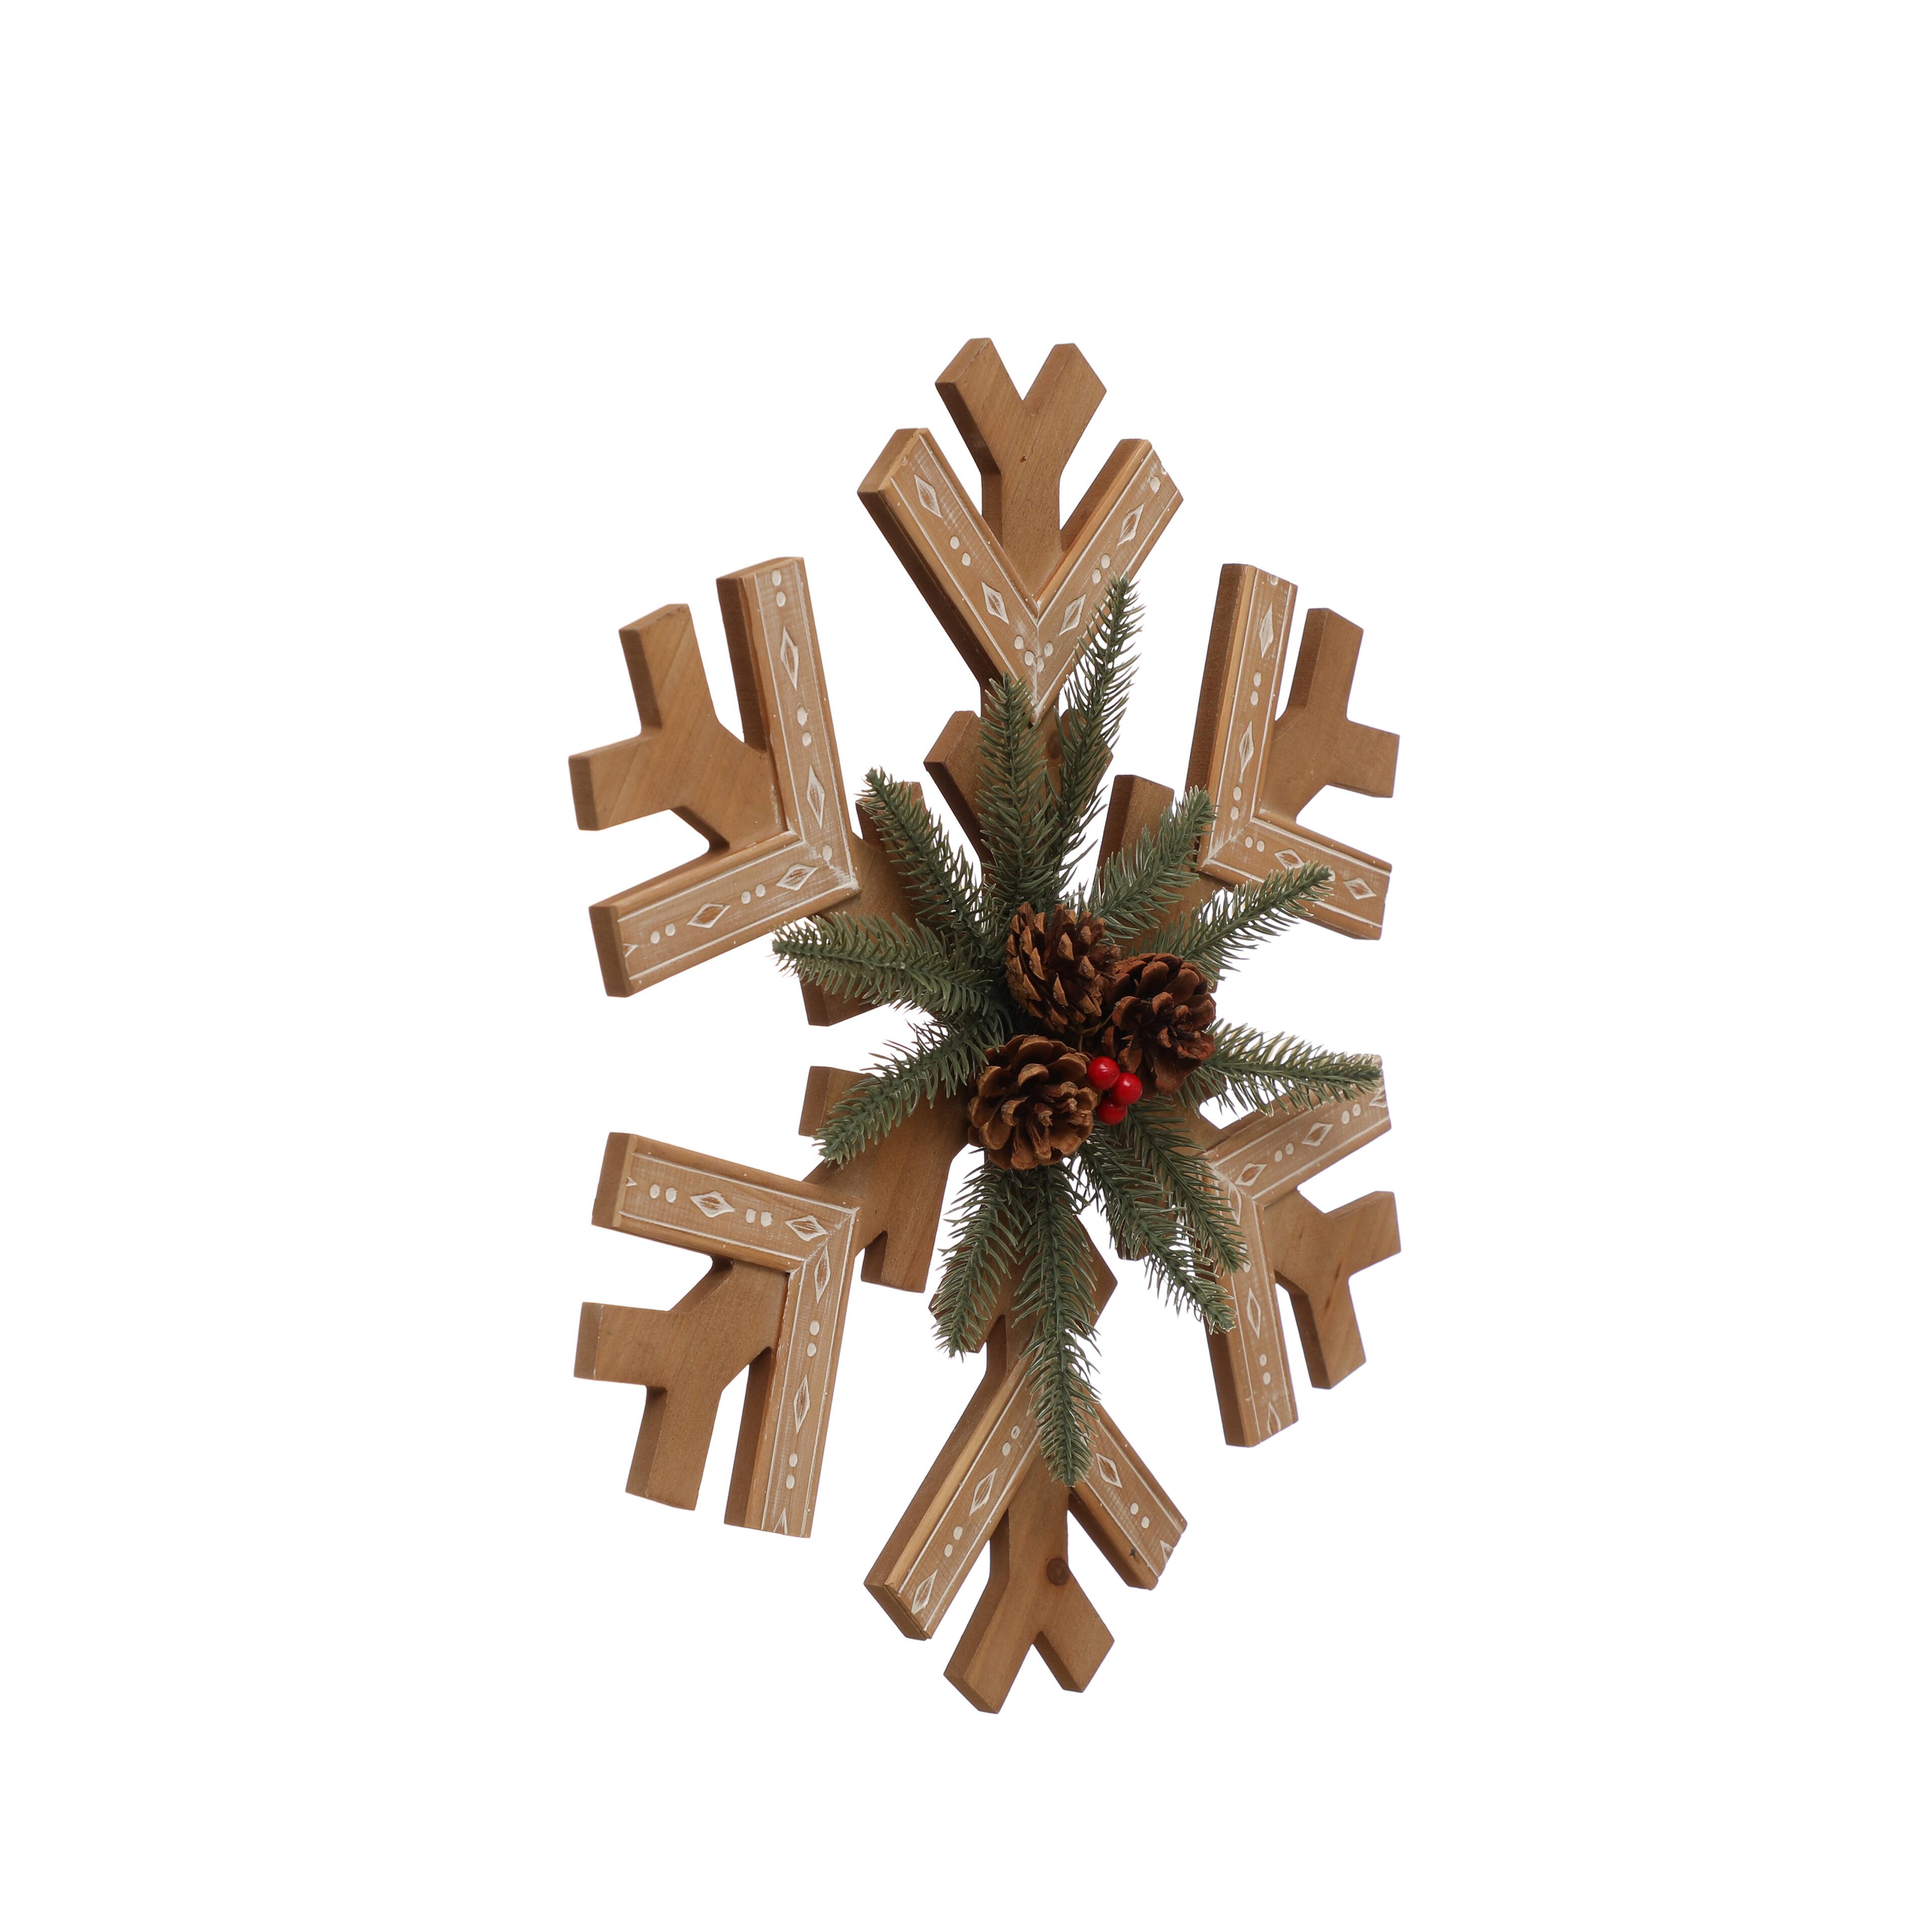 Snowflake with Pinecone Wall dcor by Ashland-Christmas Decorations, Size: 15.75” x 17.125”